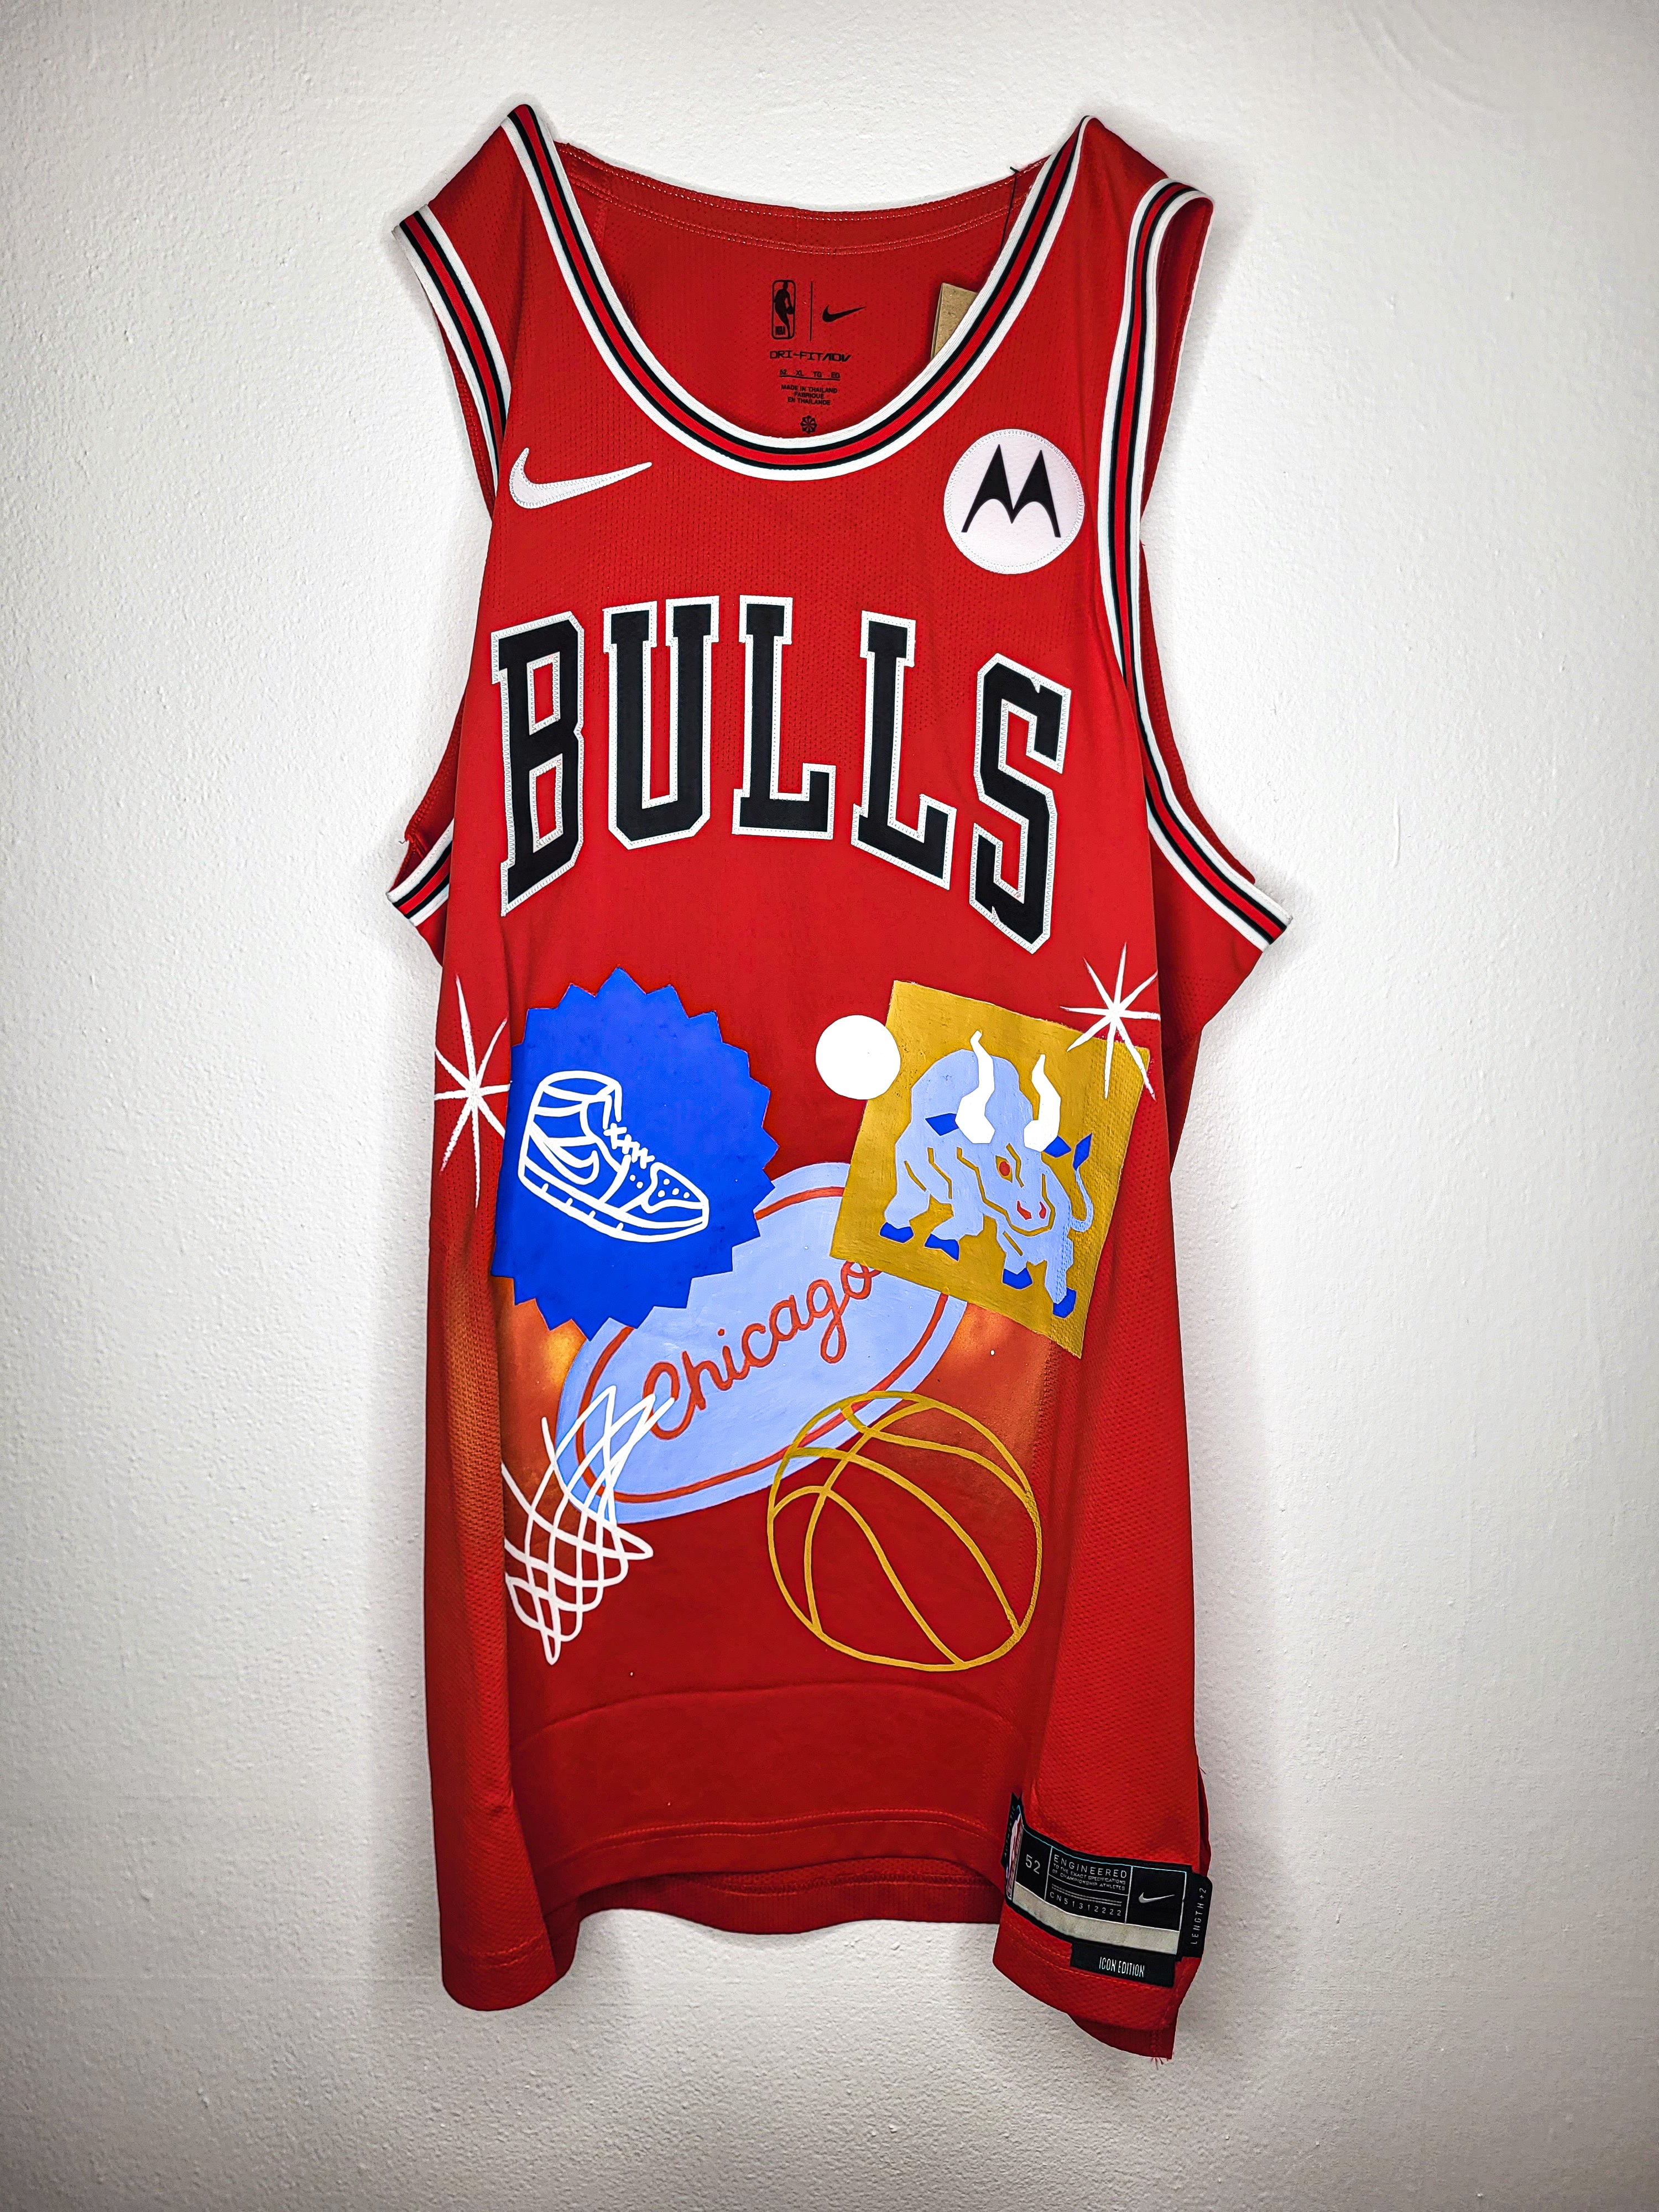 "Badges" Jersey by Stevie Shao